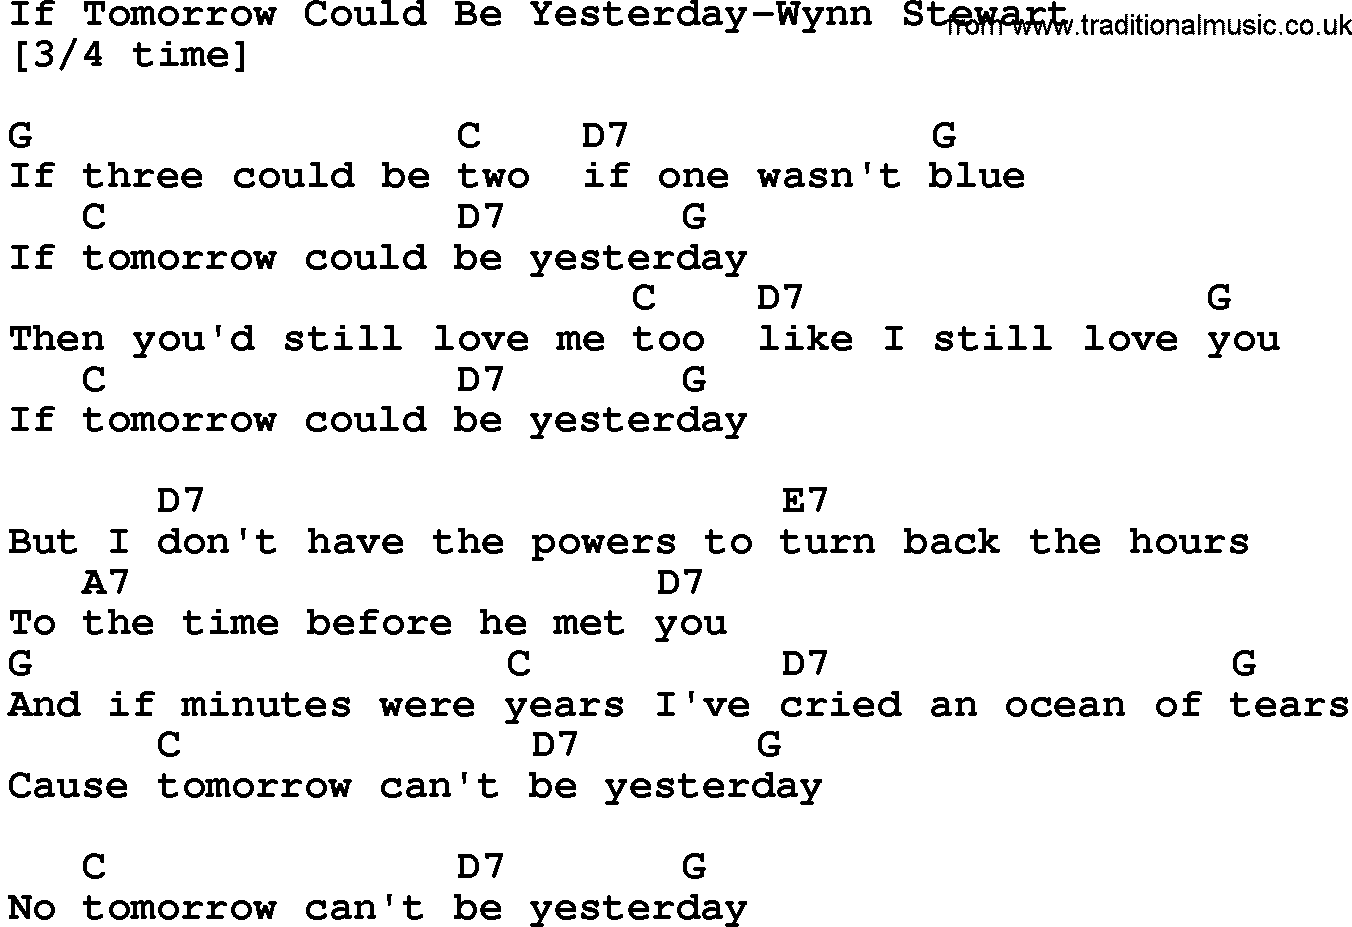 Country music song: If Tomorrow Could Be Yesterday-Wynn Stewart lyrics and chords